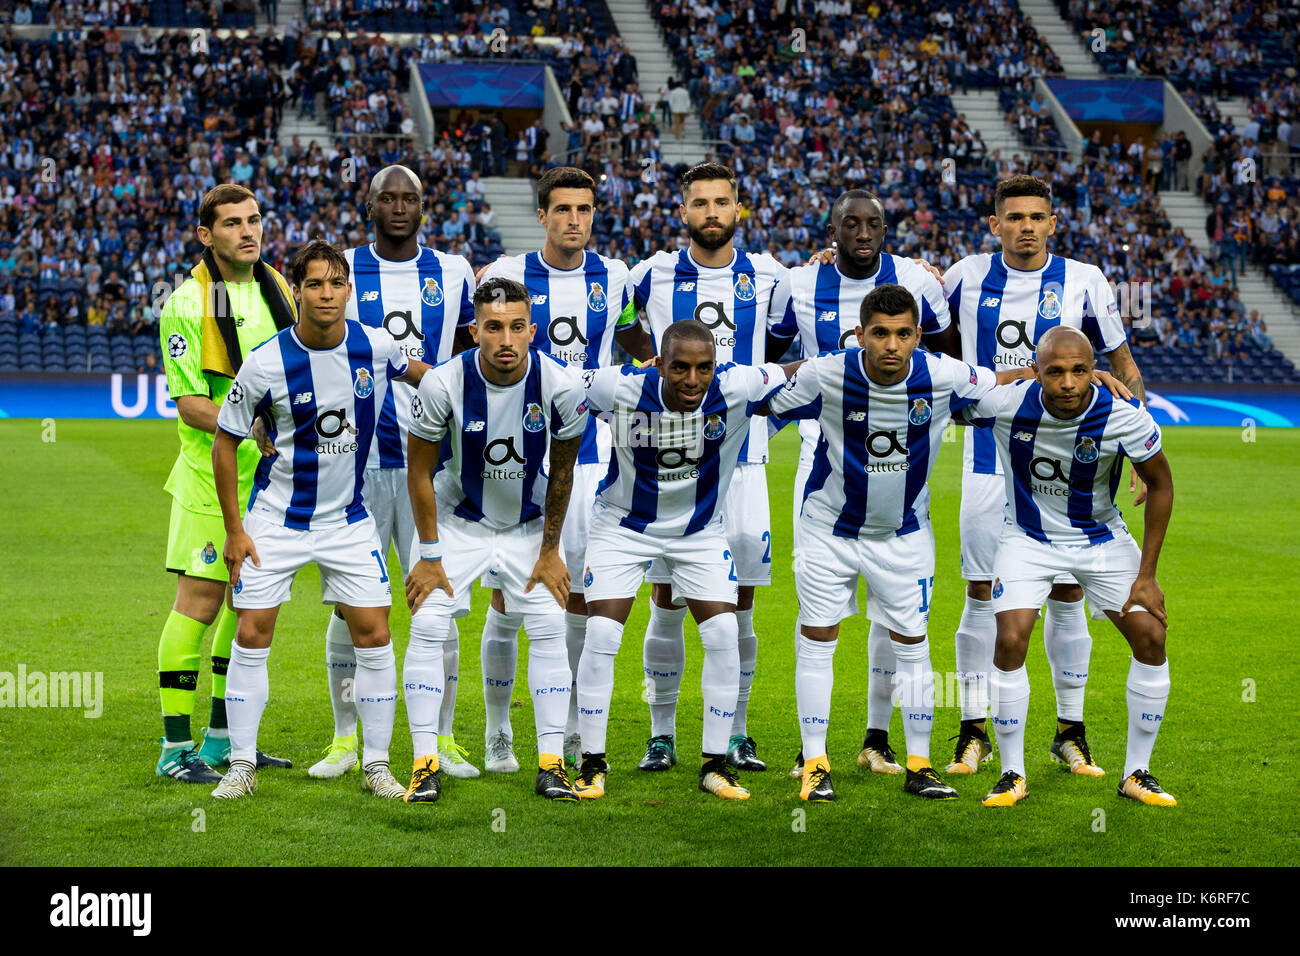 FC Porto team line up before the match for Premier League 2017/18 between FC Porto and Besiktas JK, at Dragon Stadium. Stock Photo